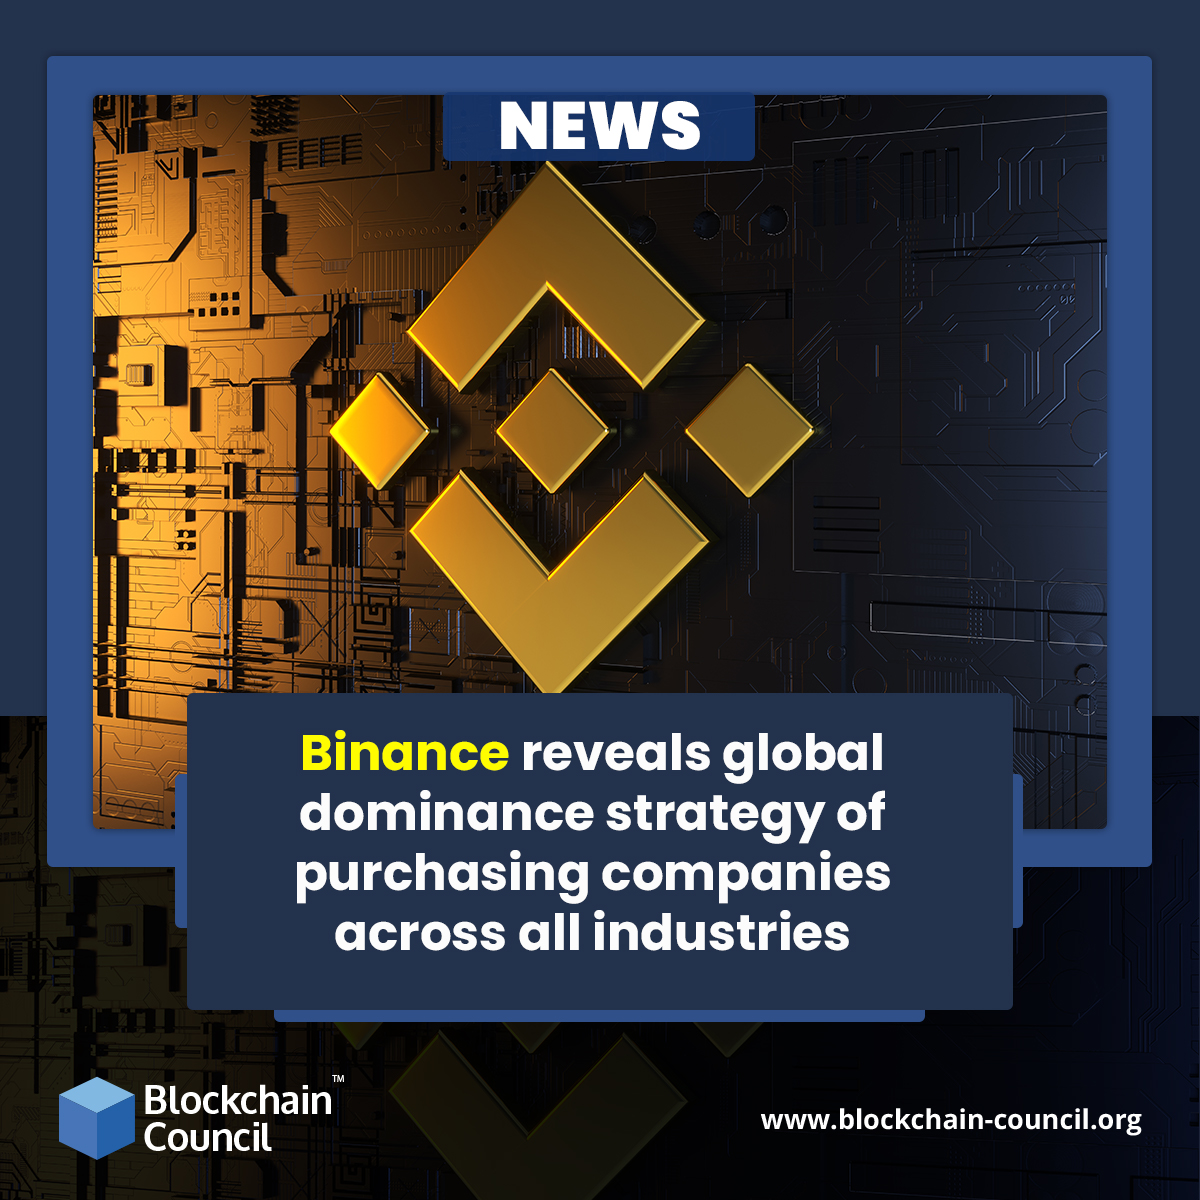 Binance reveals global dominance strategy of purchasing companies across all industries